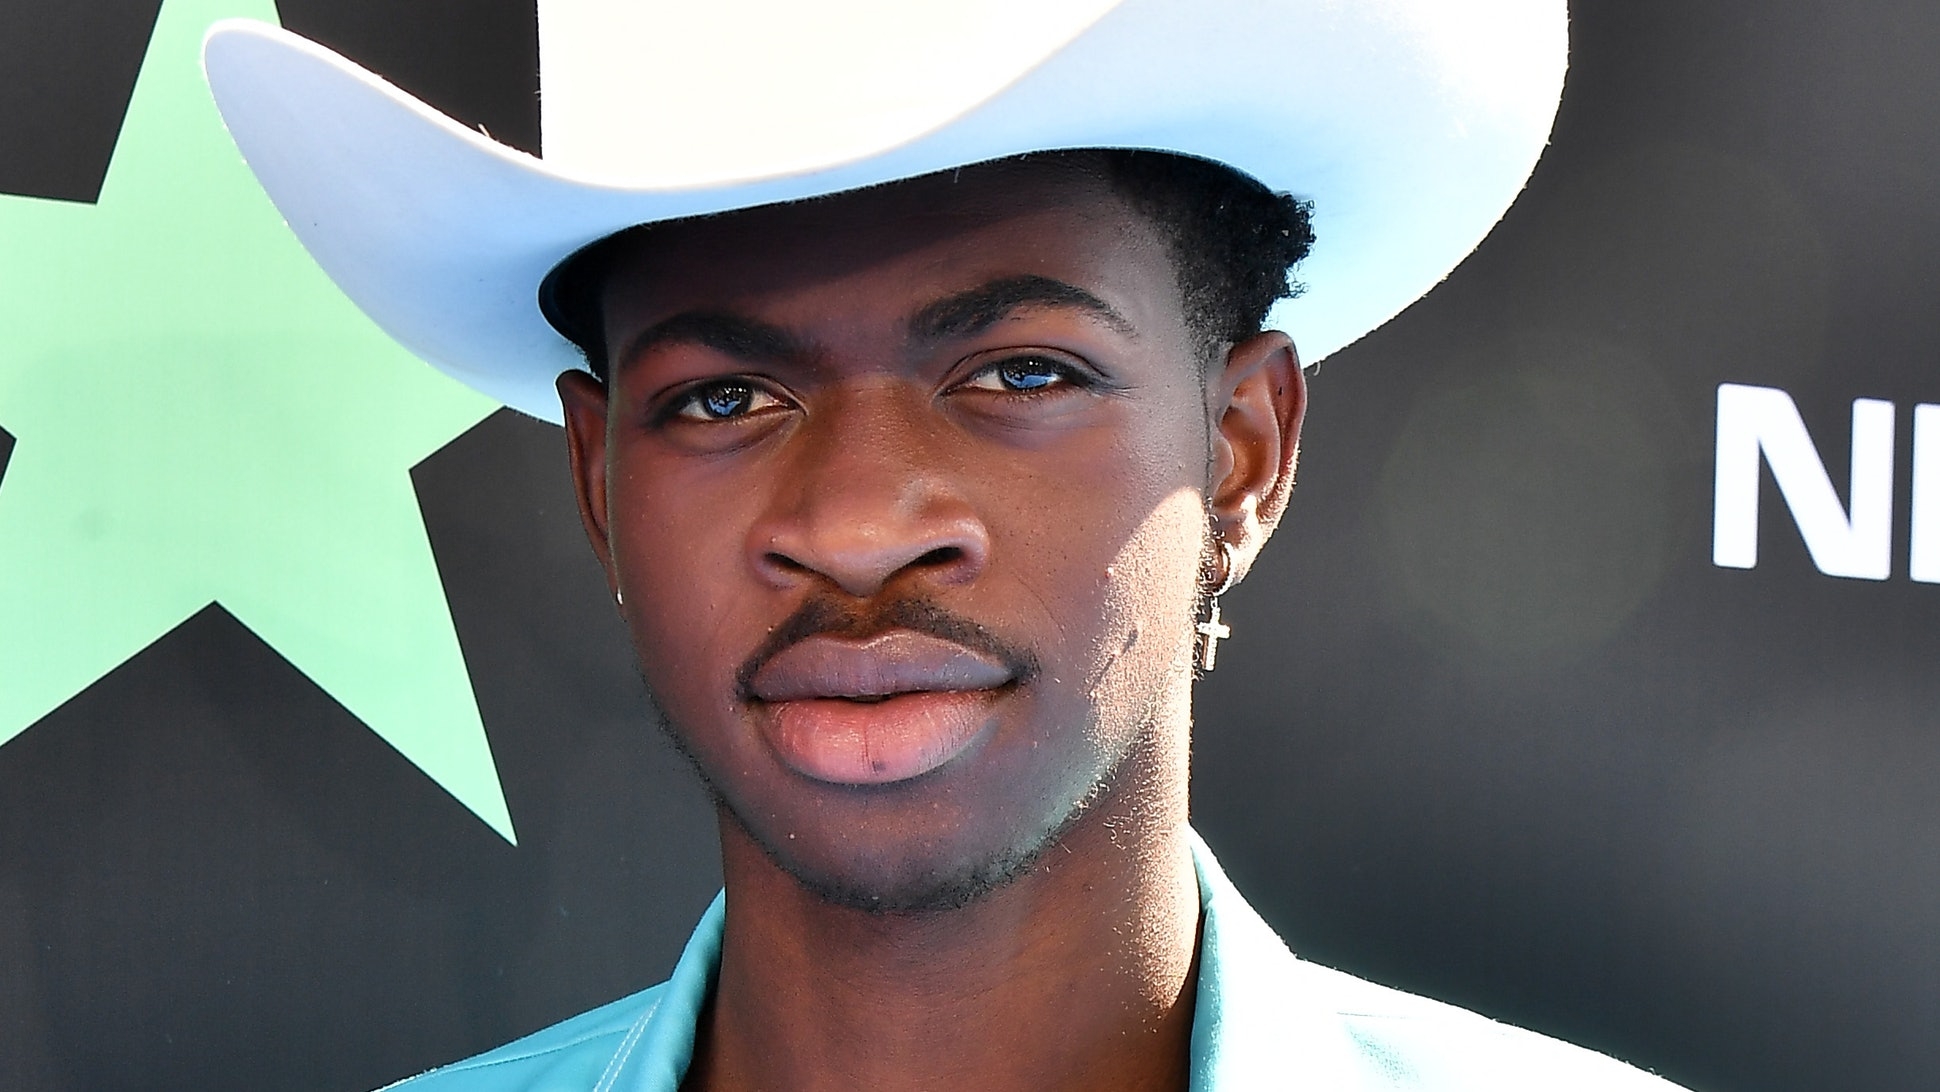 Watch Lil Nas X’s Reaction To The Backlash He’s Received Since He Came Out As LGBTQ